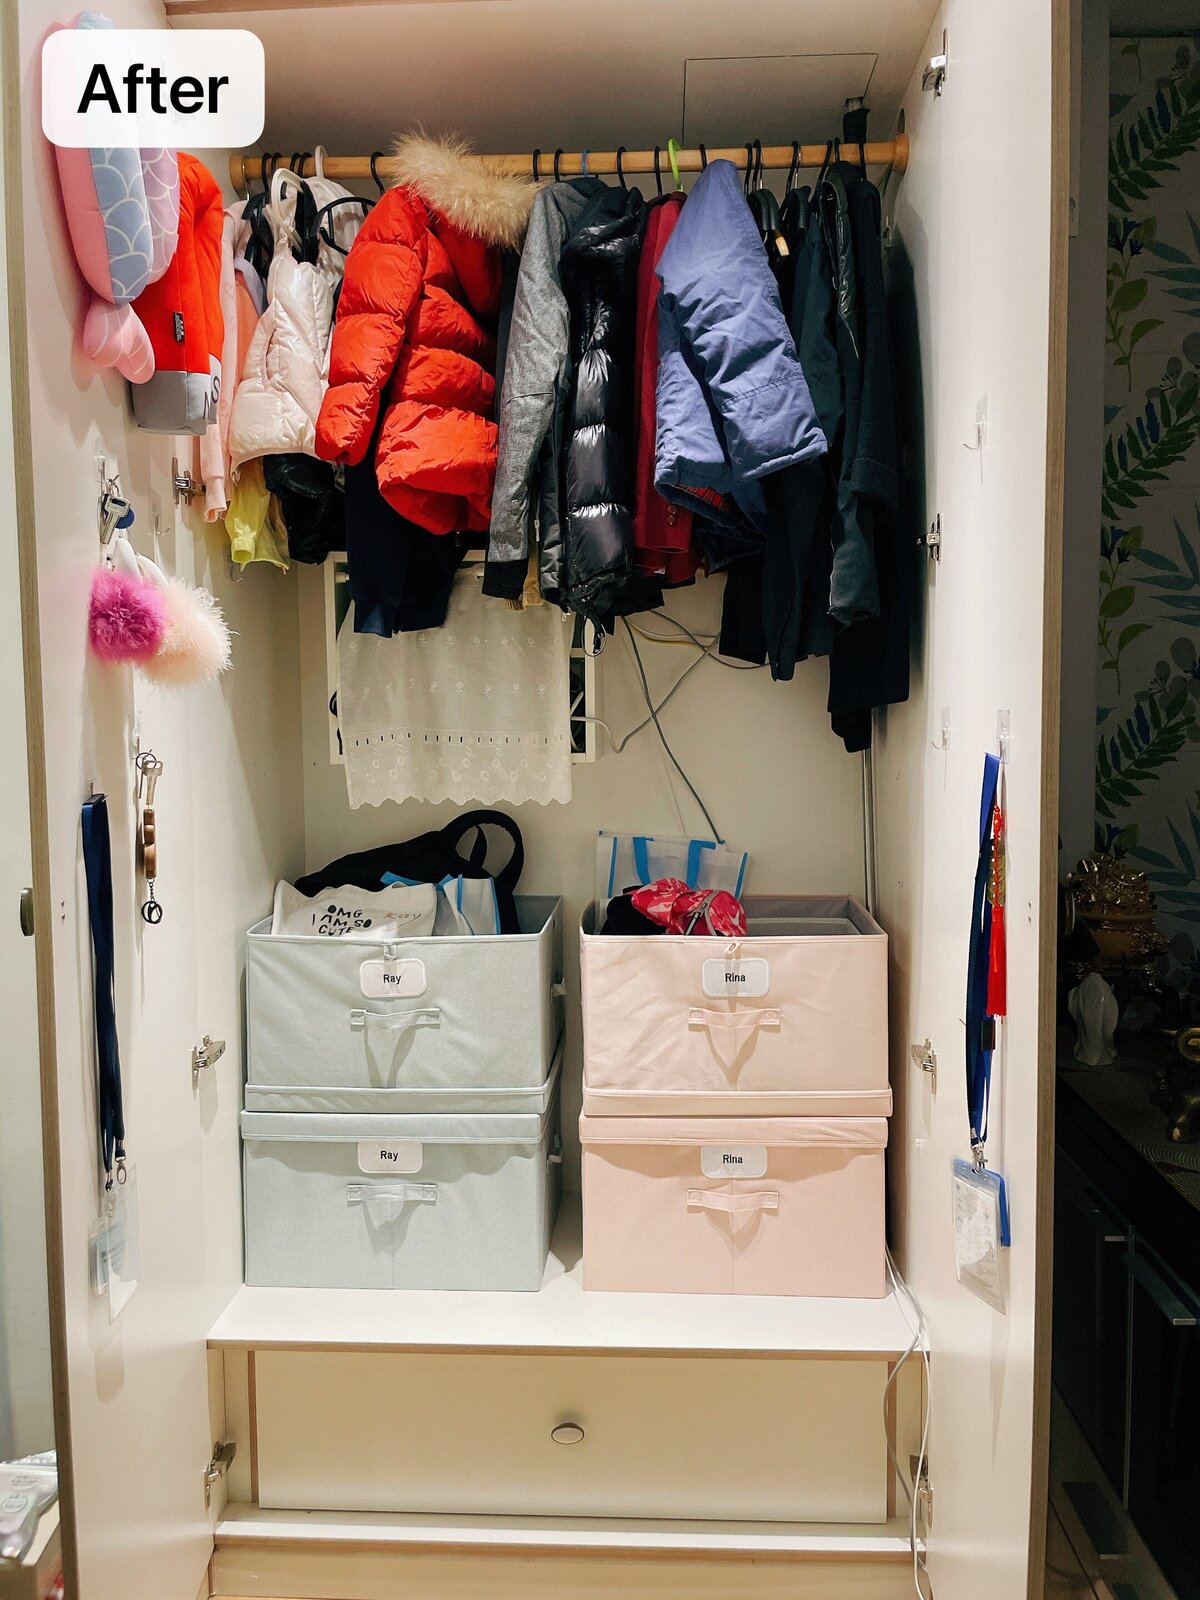 Organization Projects - Closet - Bless the Mess18